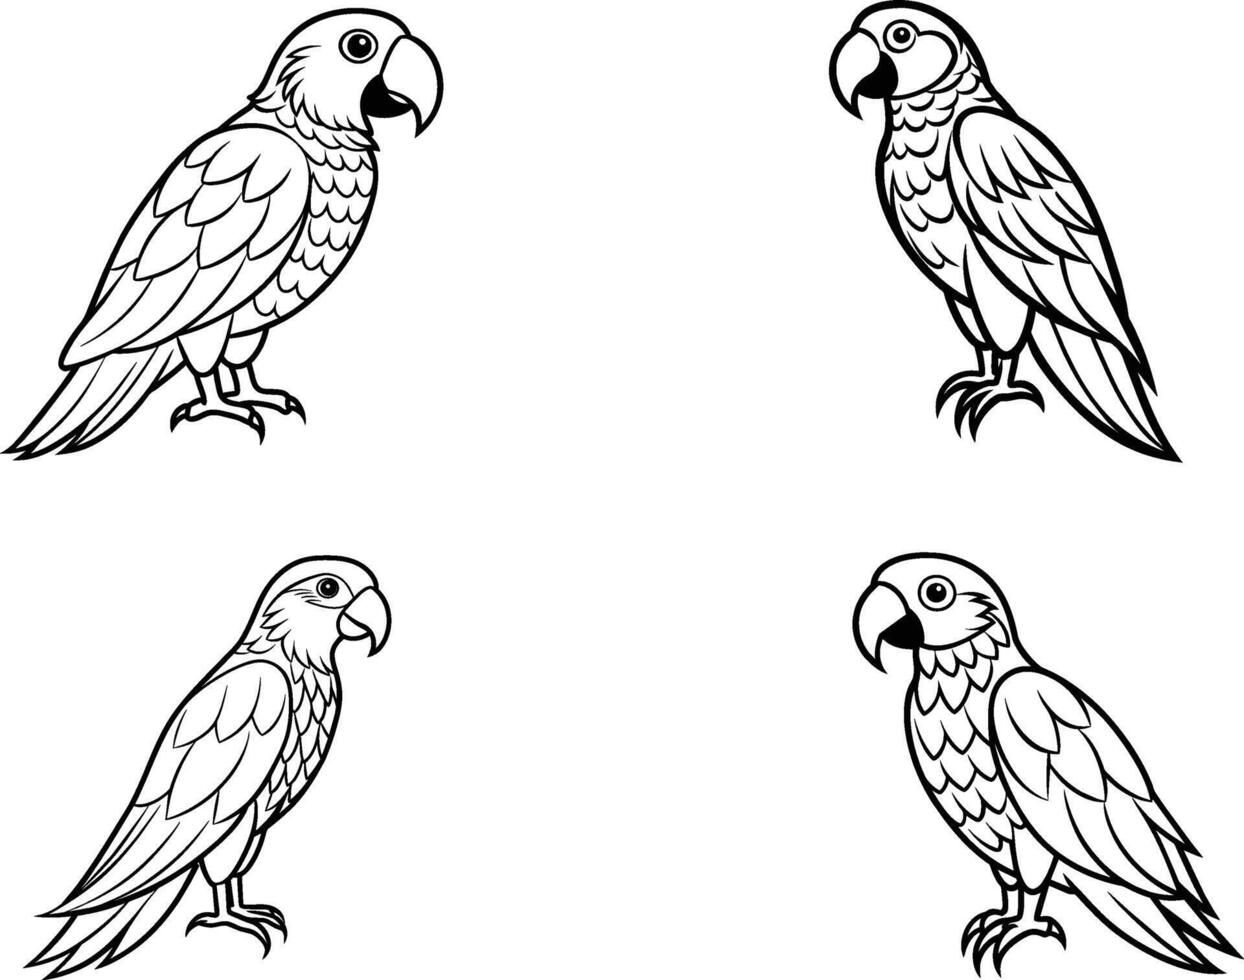 set pack of outline parrot collection illustration isolated in white background vector